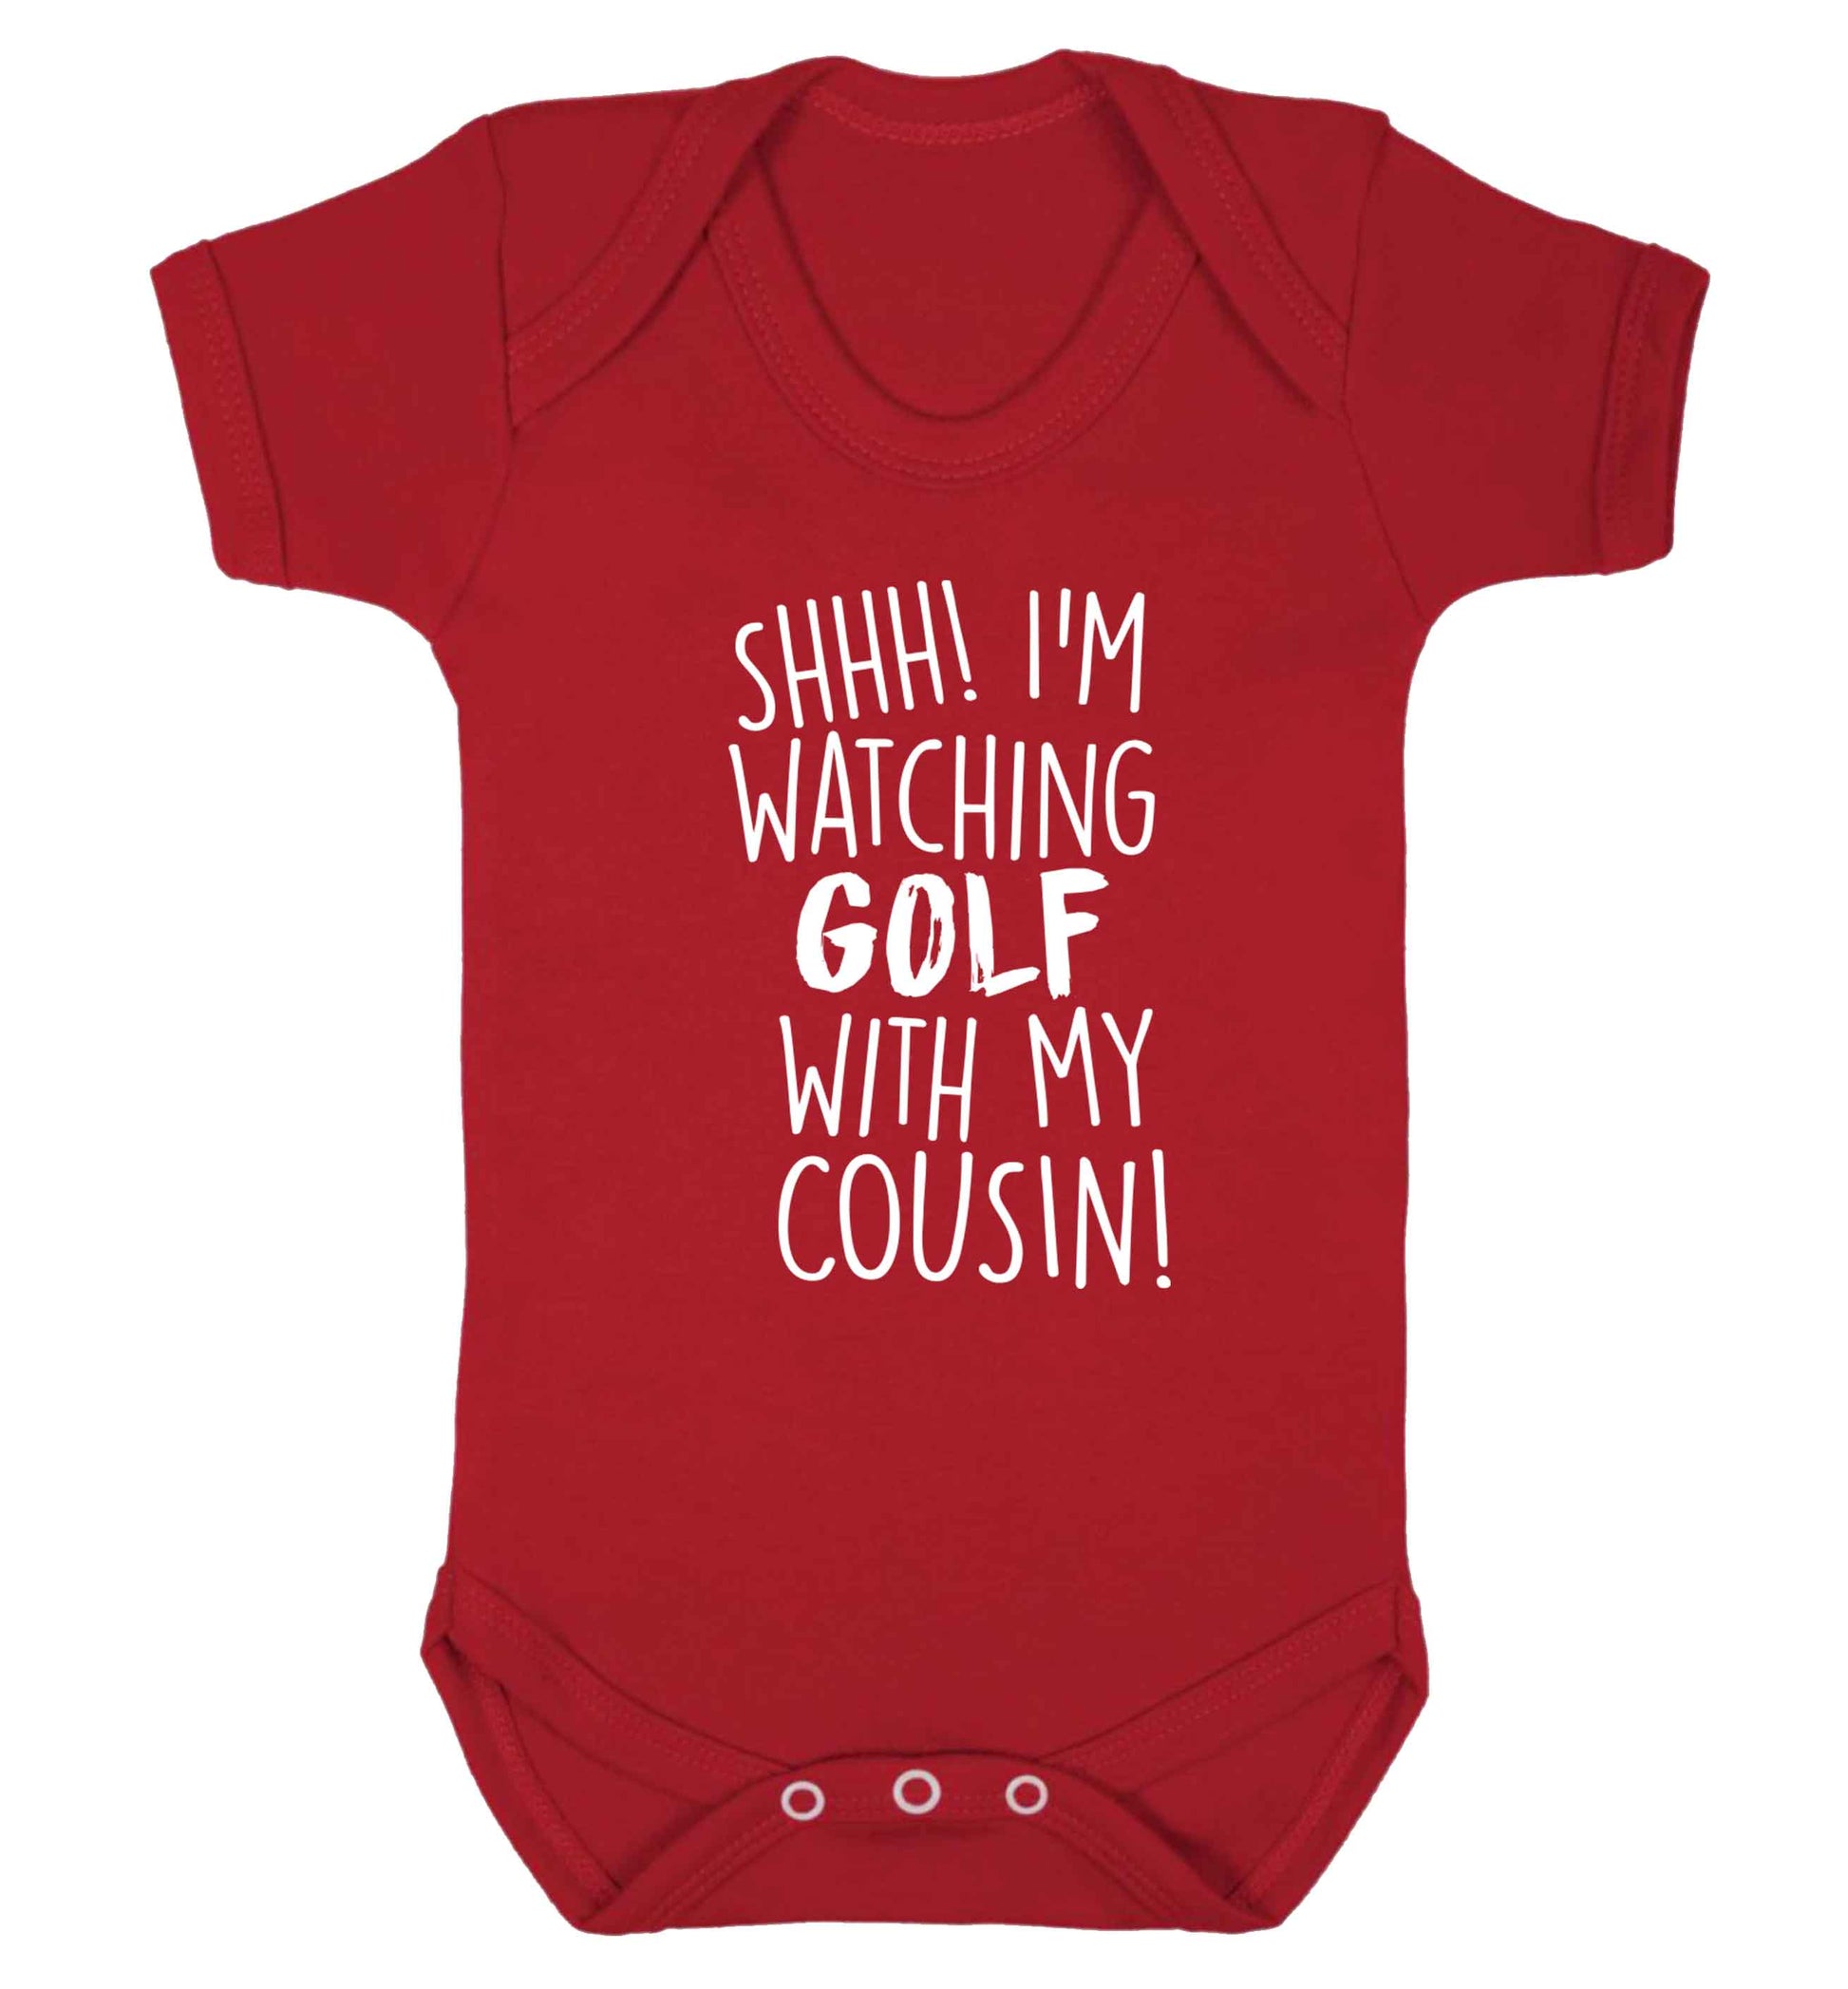 Shh I'm watching golf with my cousin Baby Vest red 18-24 months